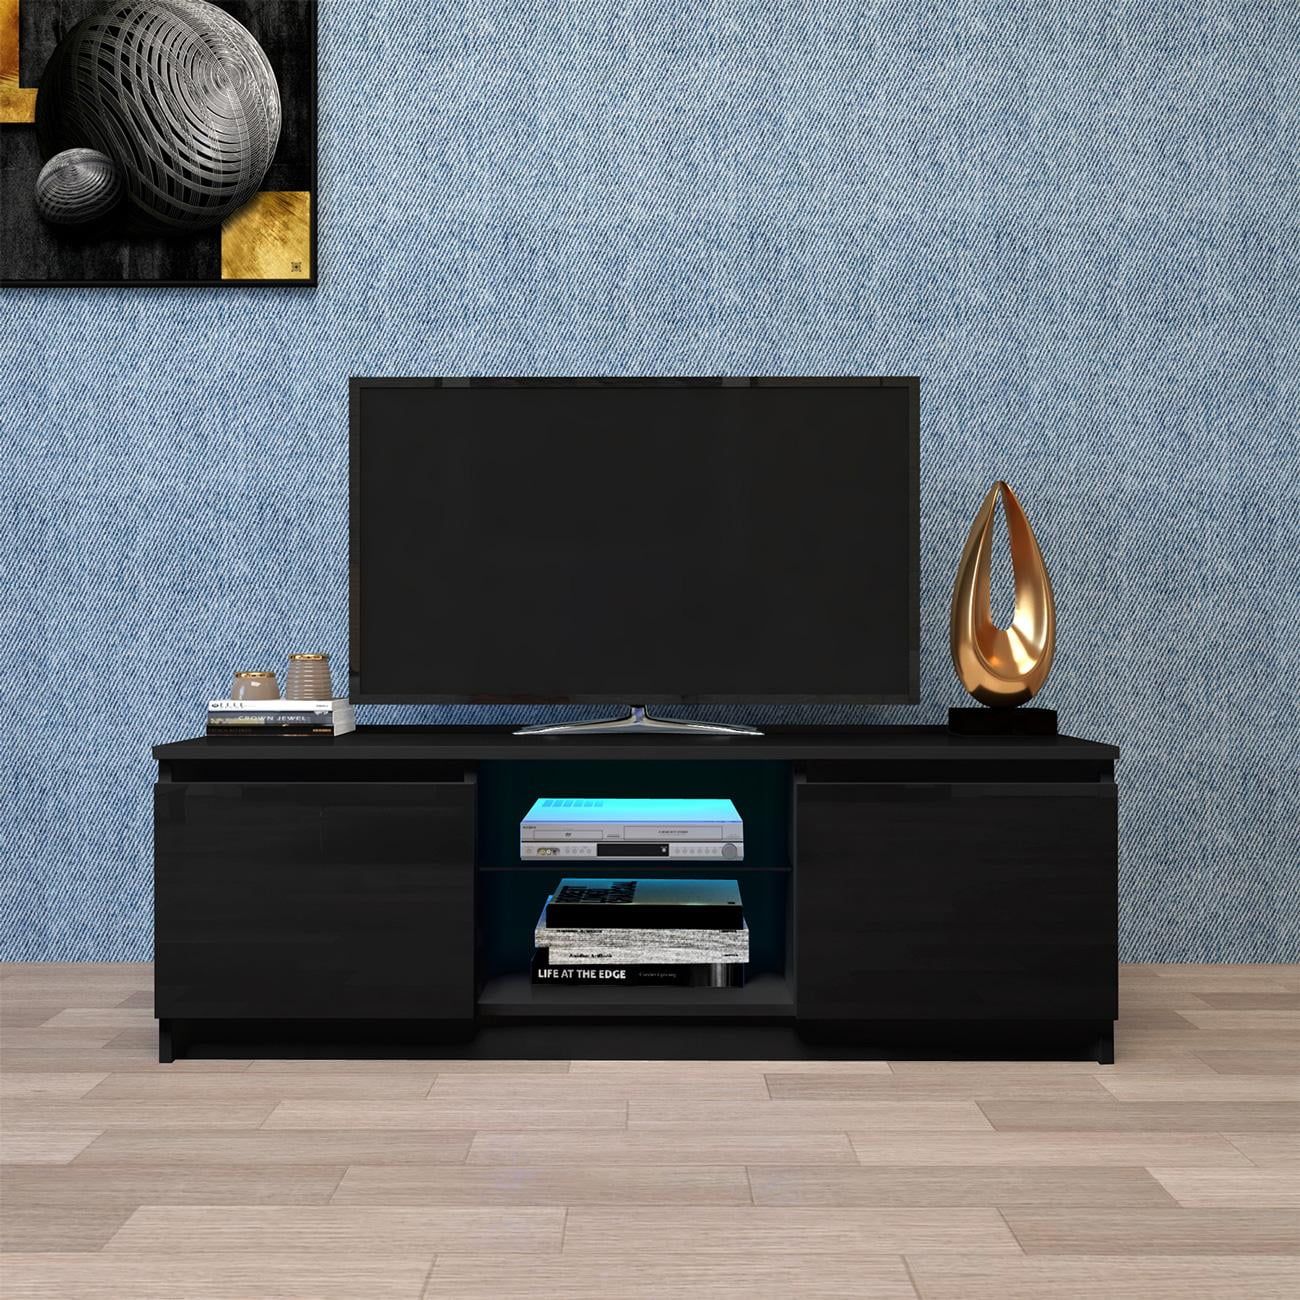 Tv Stand With Storage Drawers Shelves Led Rgb Lights, For Flat Tv 40 55 Inside Black Rgb Entertainment Centers (Gallery 3 of 20)